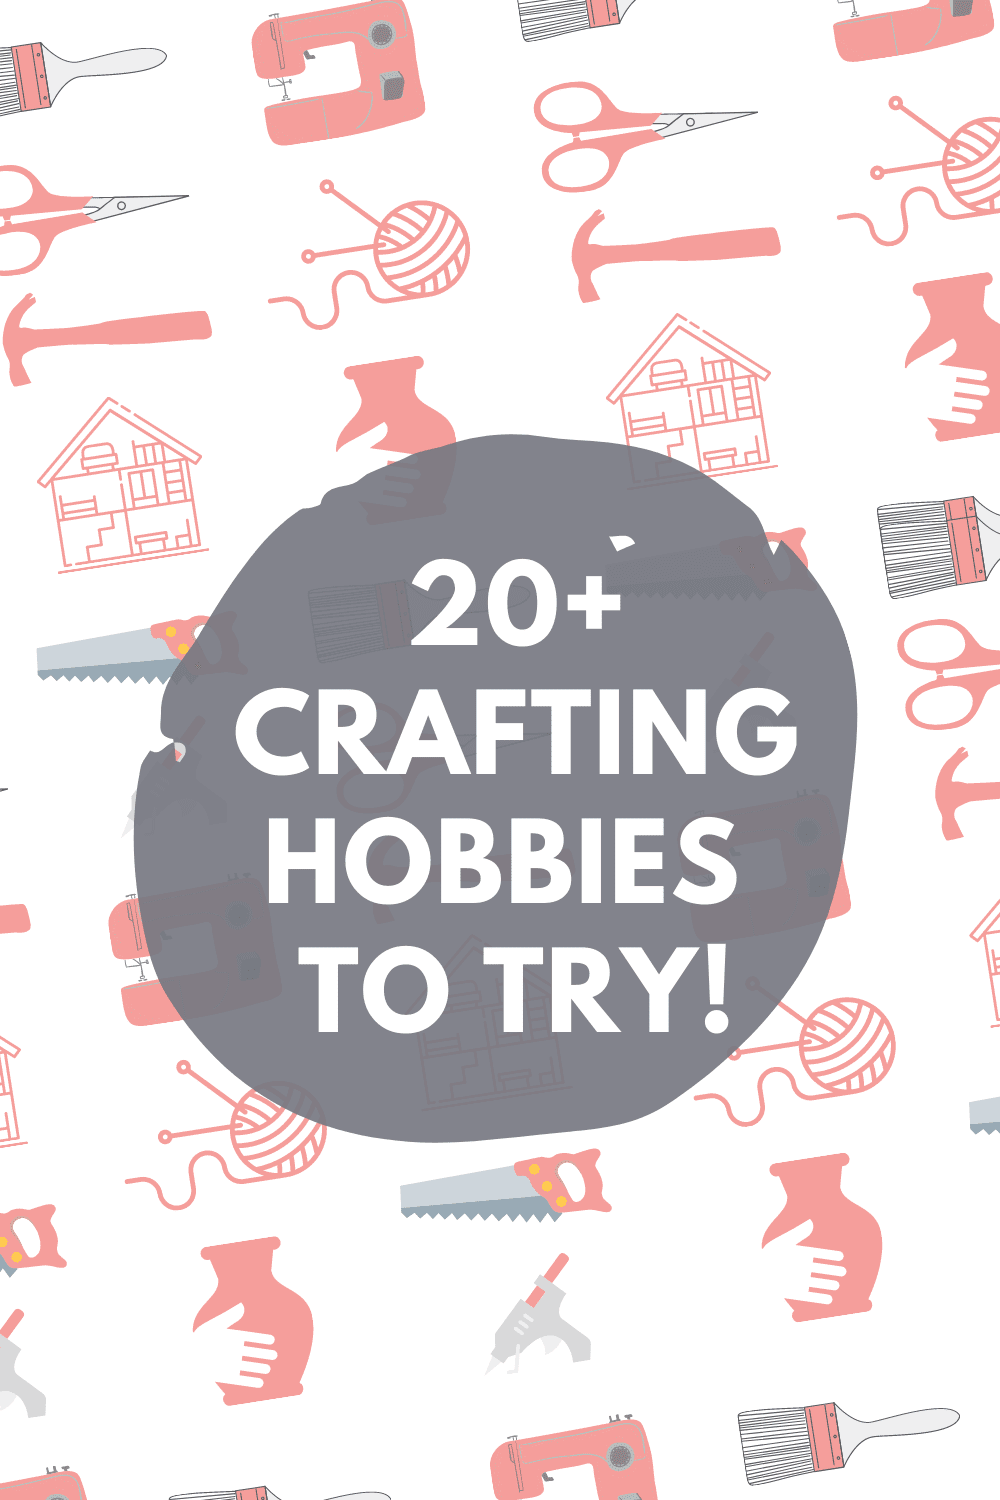 The best quality tools for model building, crafts and other hobbies